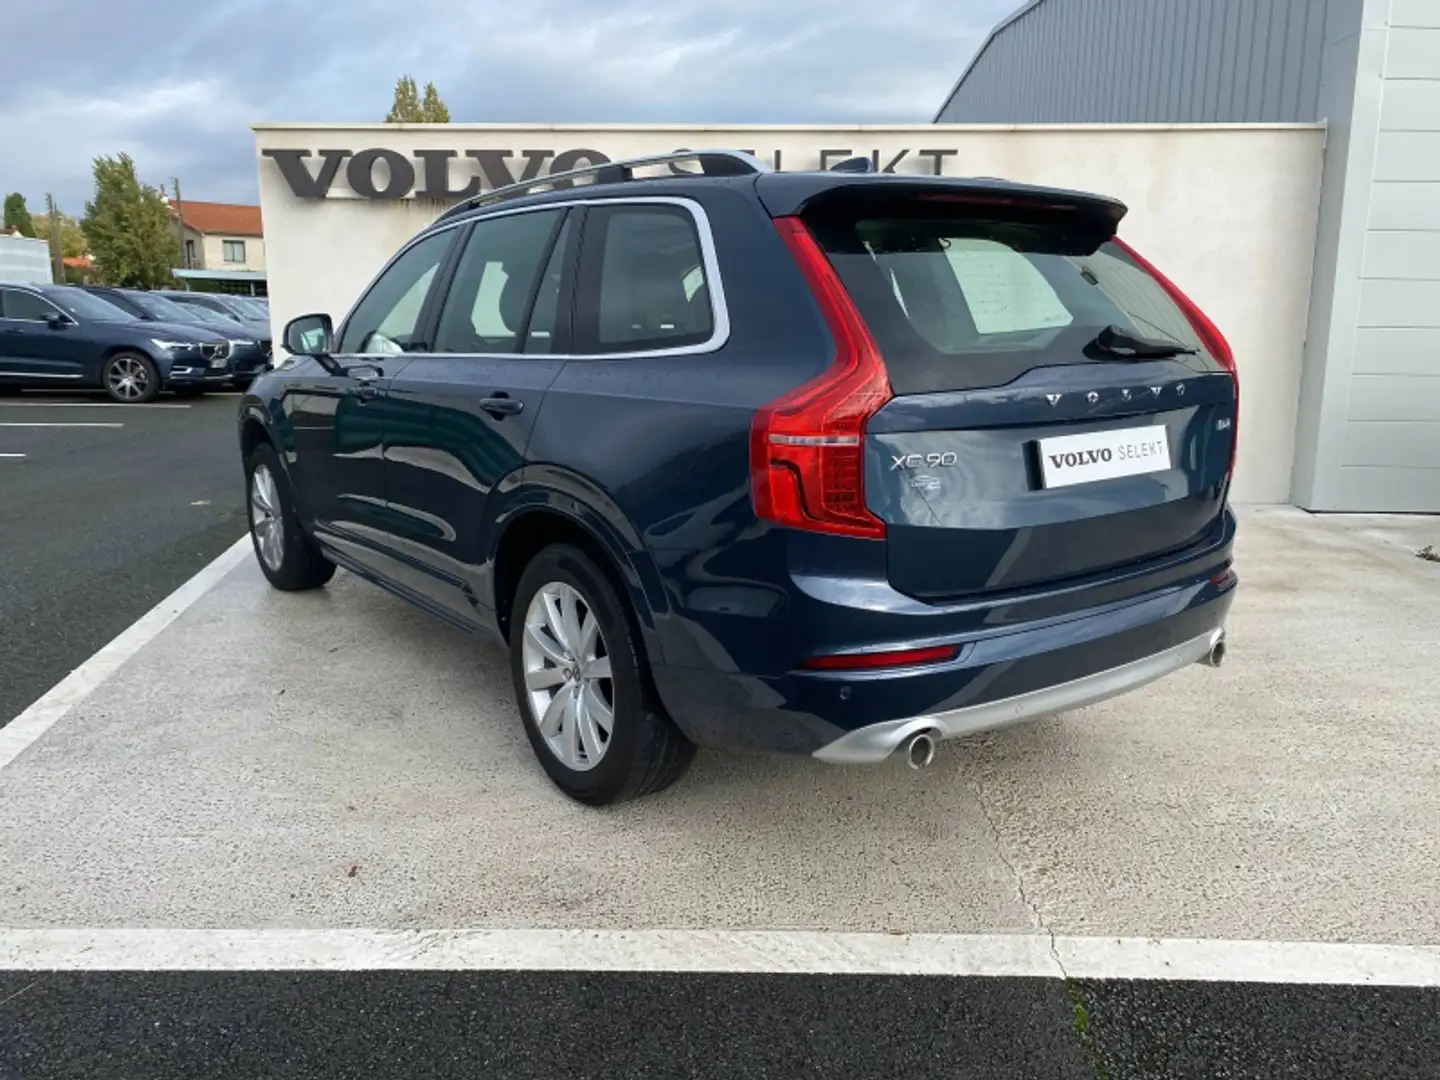 Volvo XC90 D4 190ch Momentum Geartronic 7 places - 2